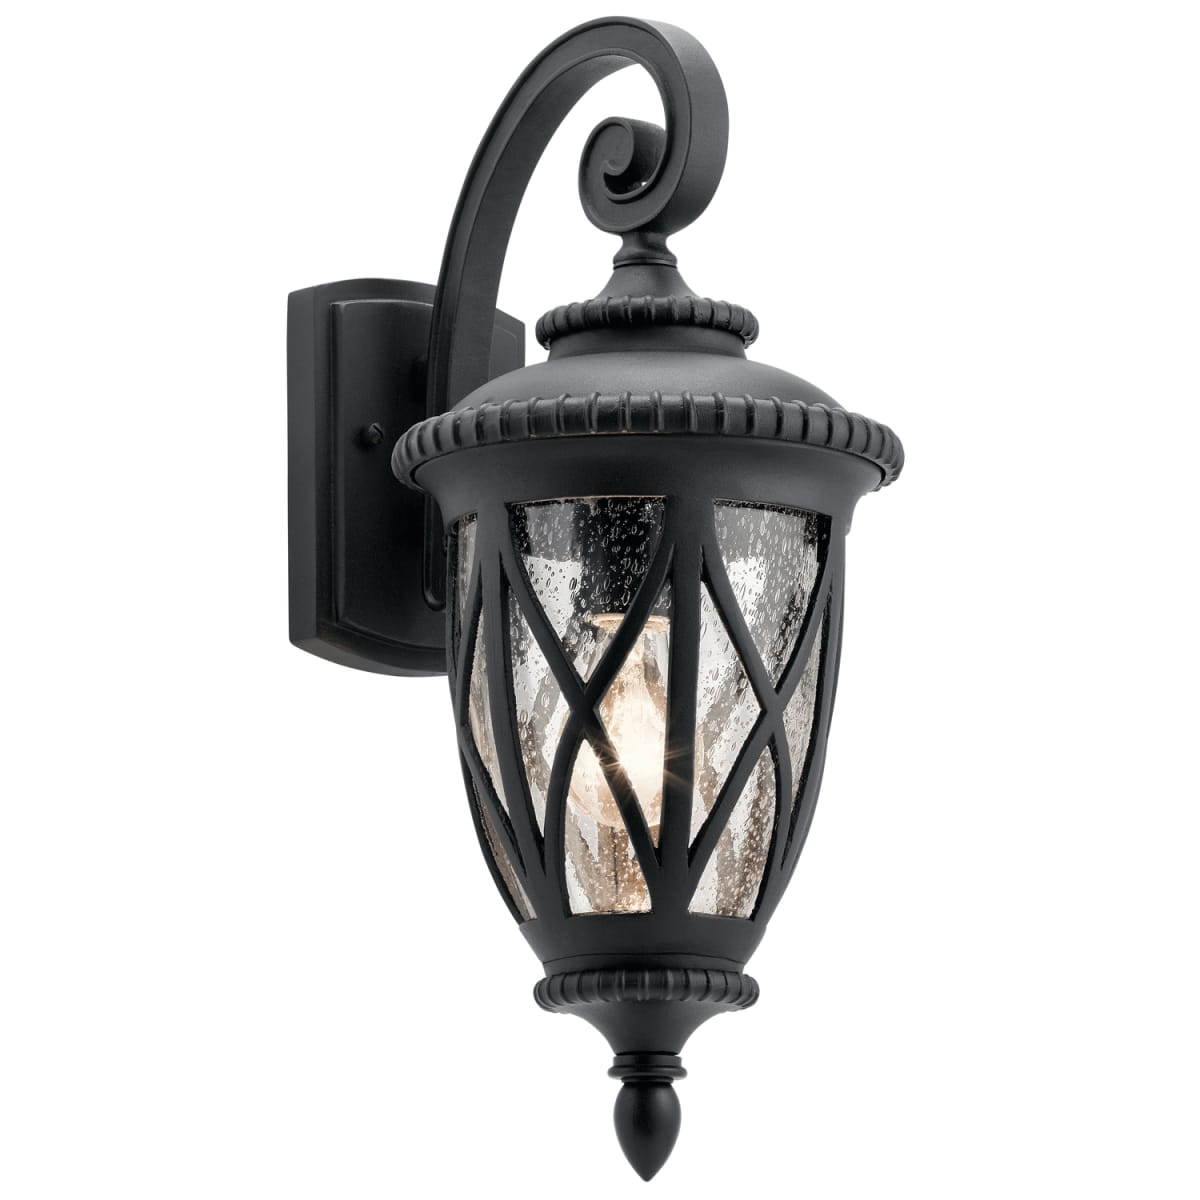 Kichler 49847bkt Admirals Cove 1 Light, 1 Light Black 18 75 In Outdoor Wall Lantern Sconce With Seeded Glass